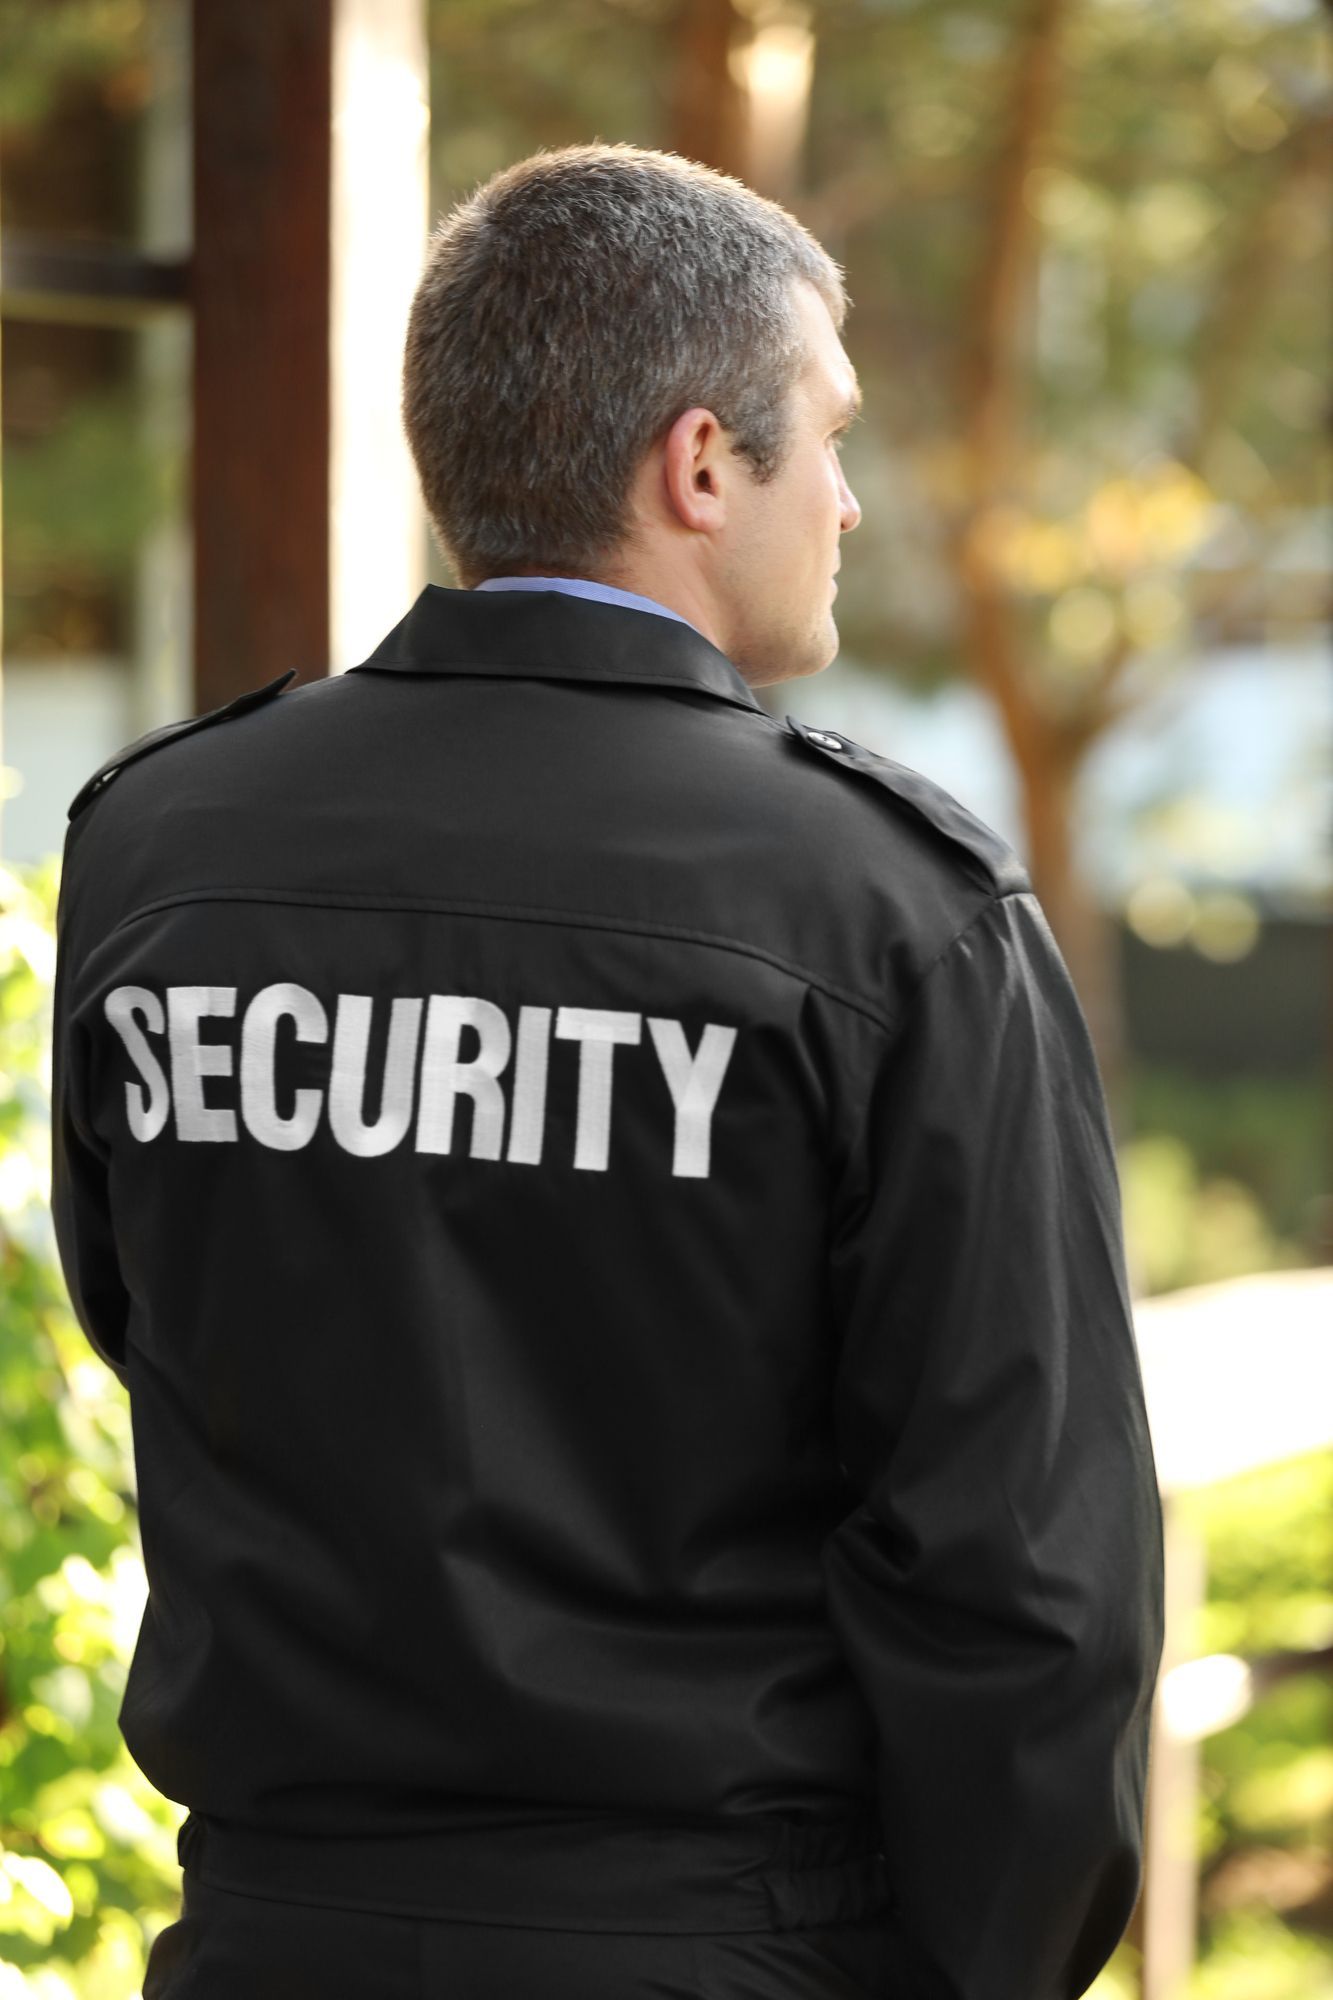 A security guard wearing a black jacket with the word security on the back.